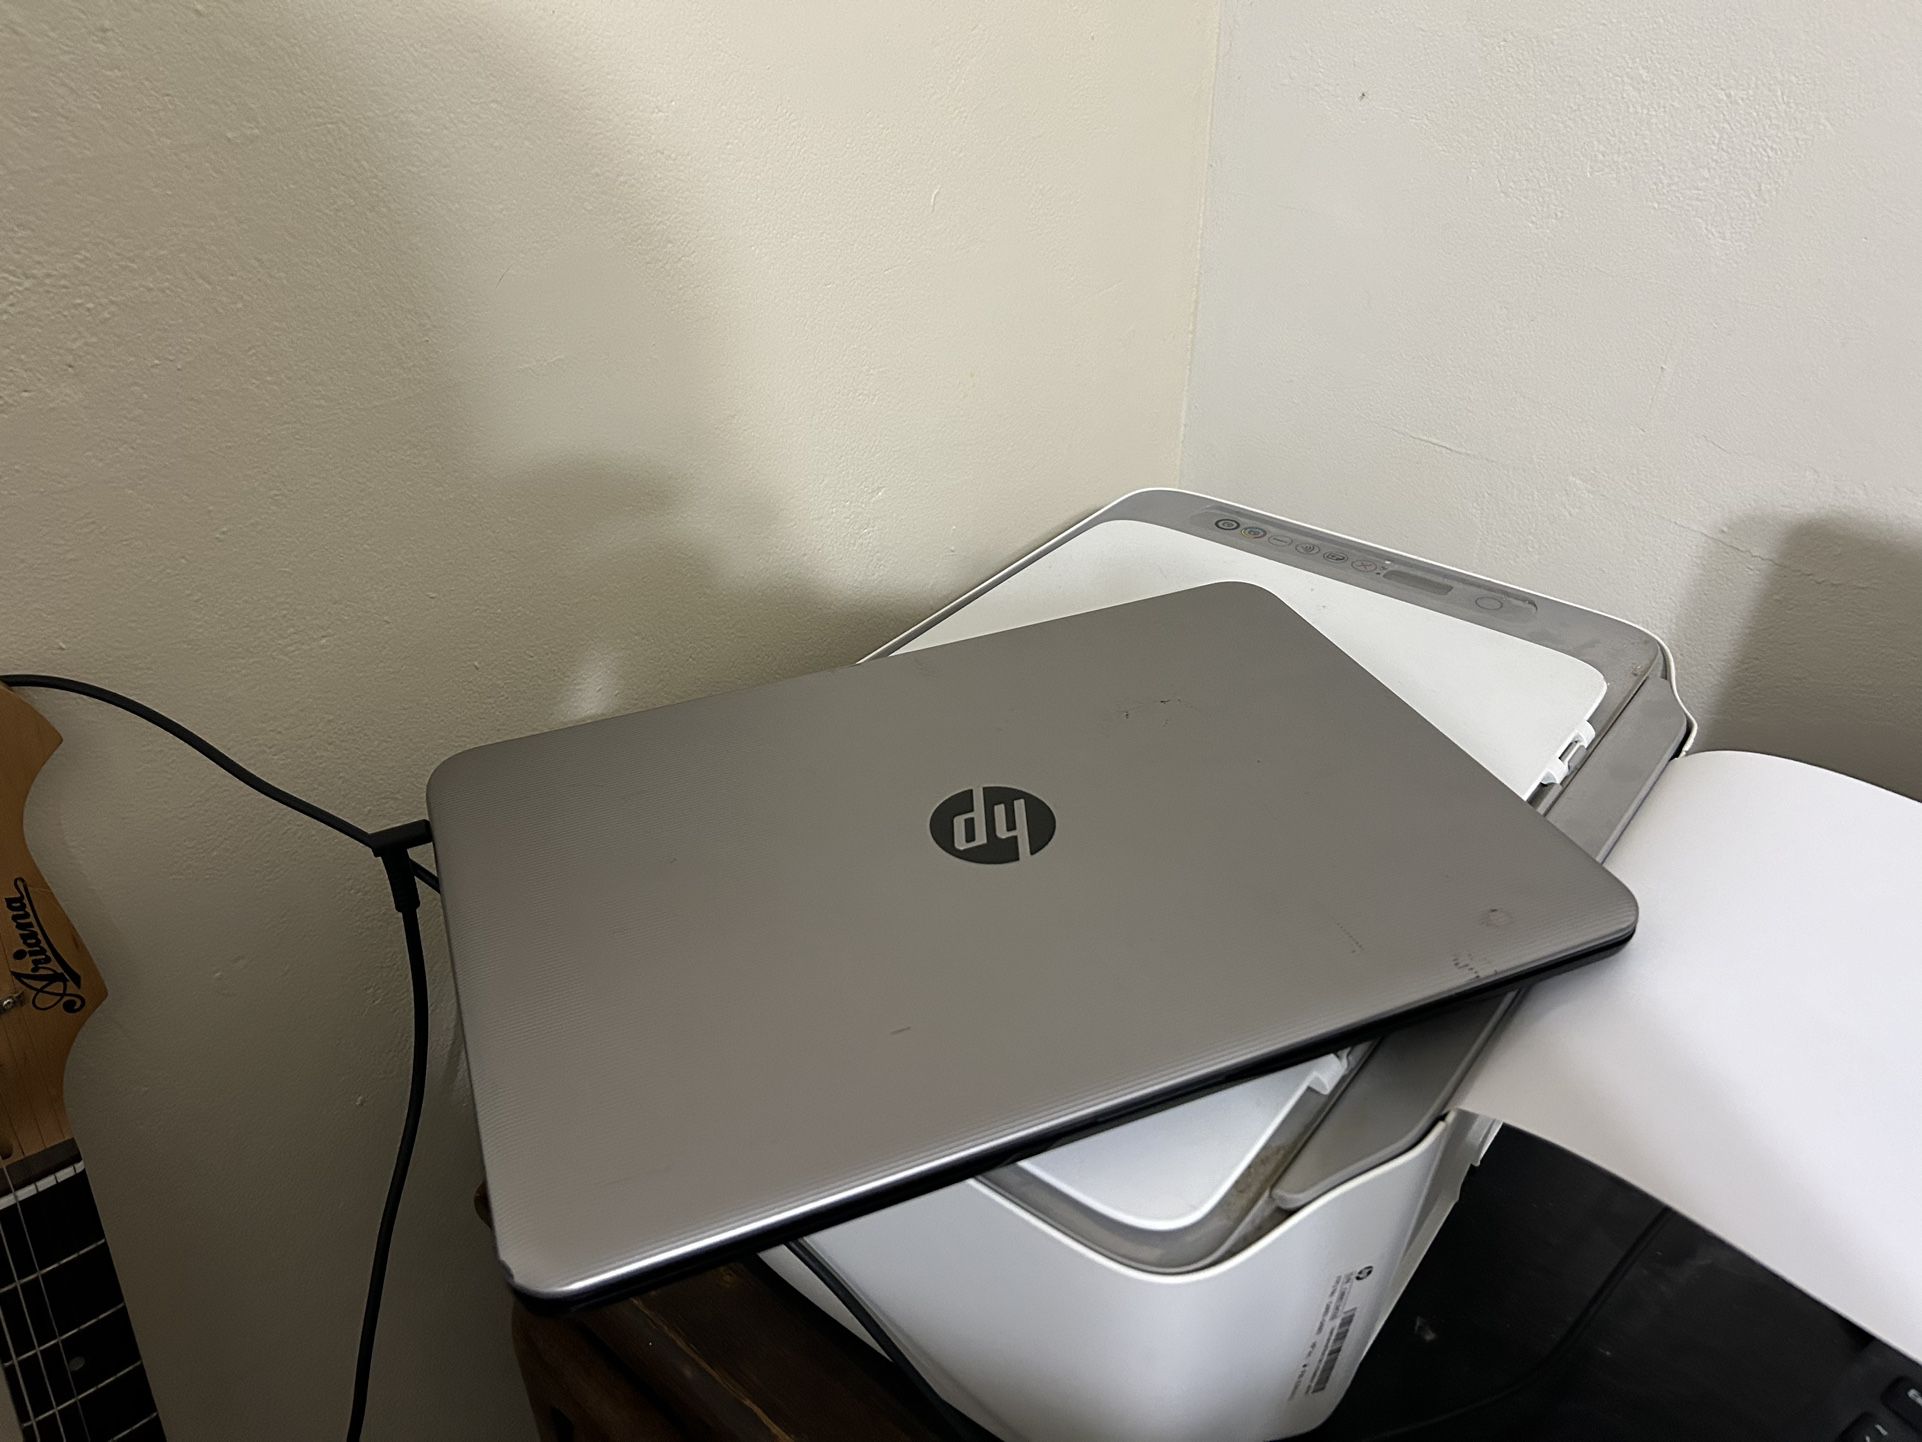 HP pavilion notebook used